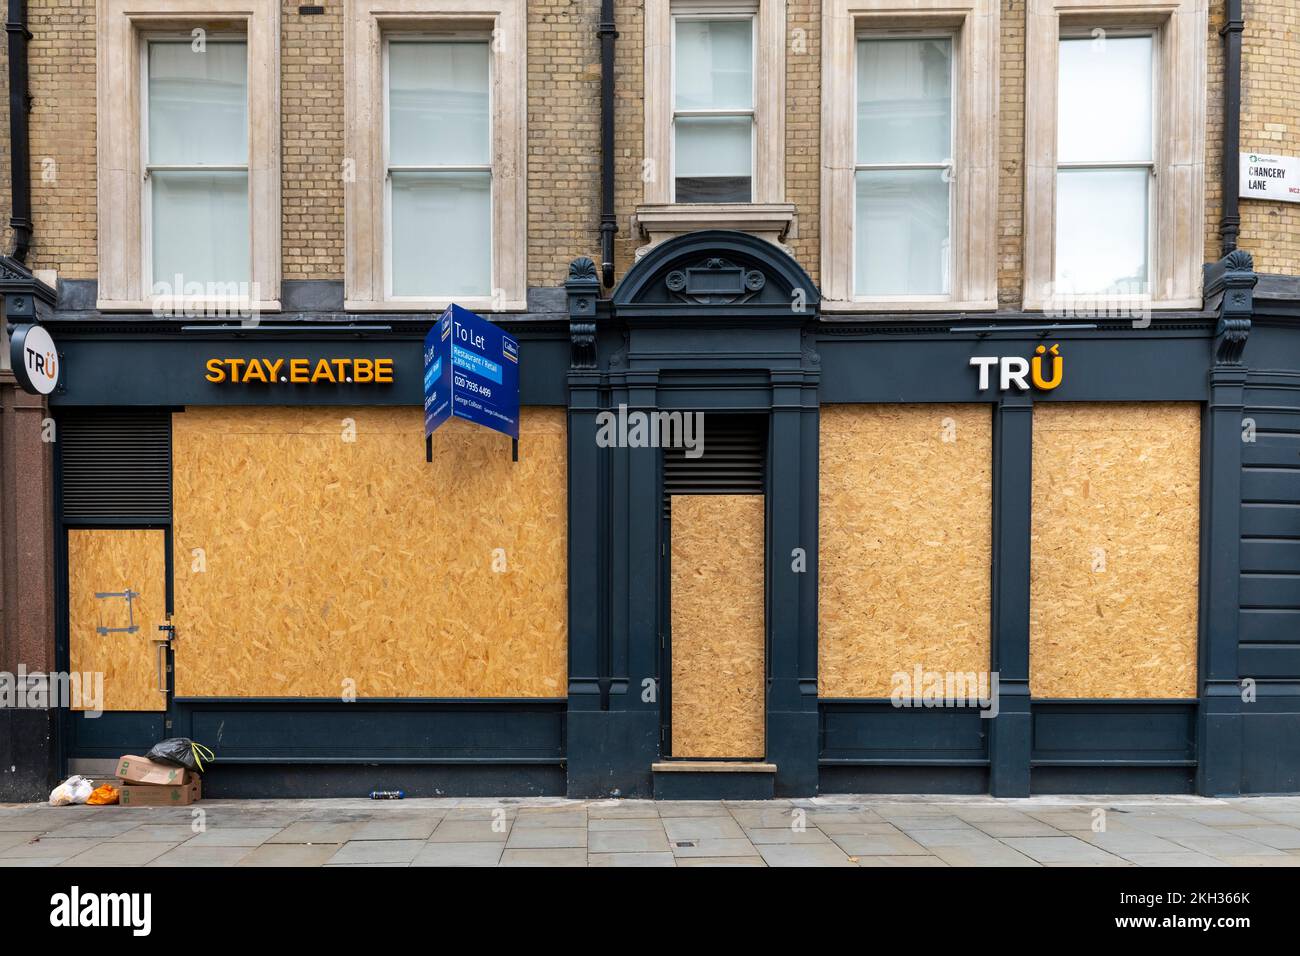 People walking past a closed down and boarded up restaurant / cafe, High Holborn, London, UK.  22 Oct 2022 Stock Photo